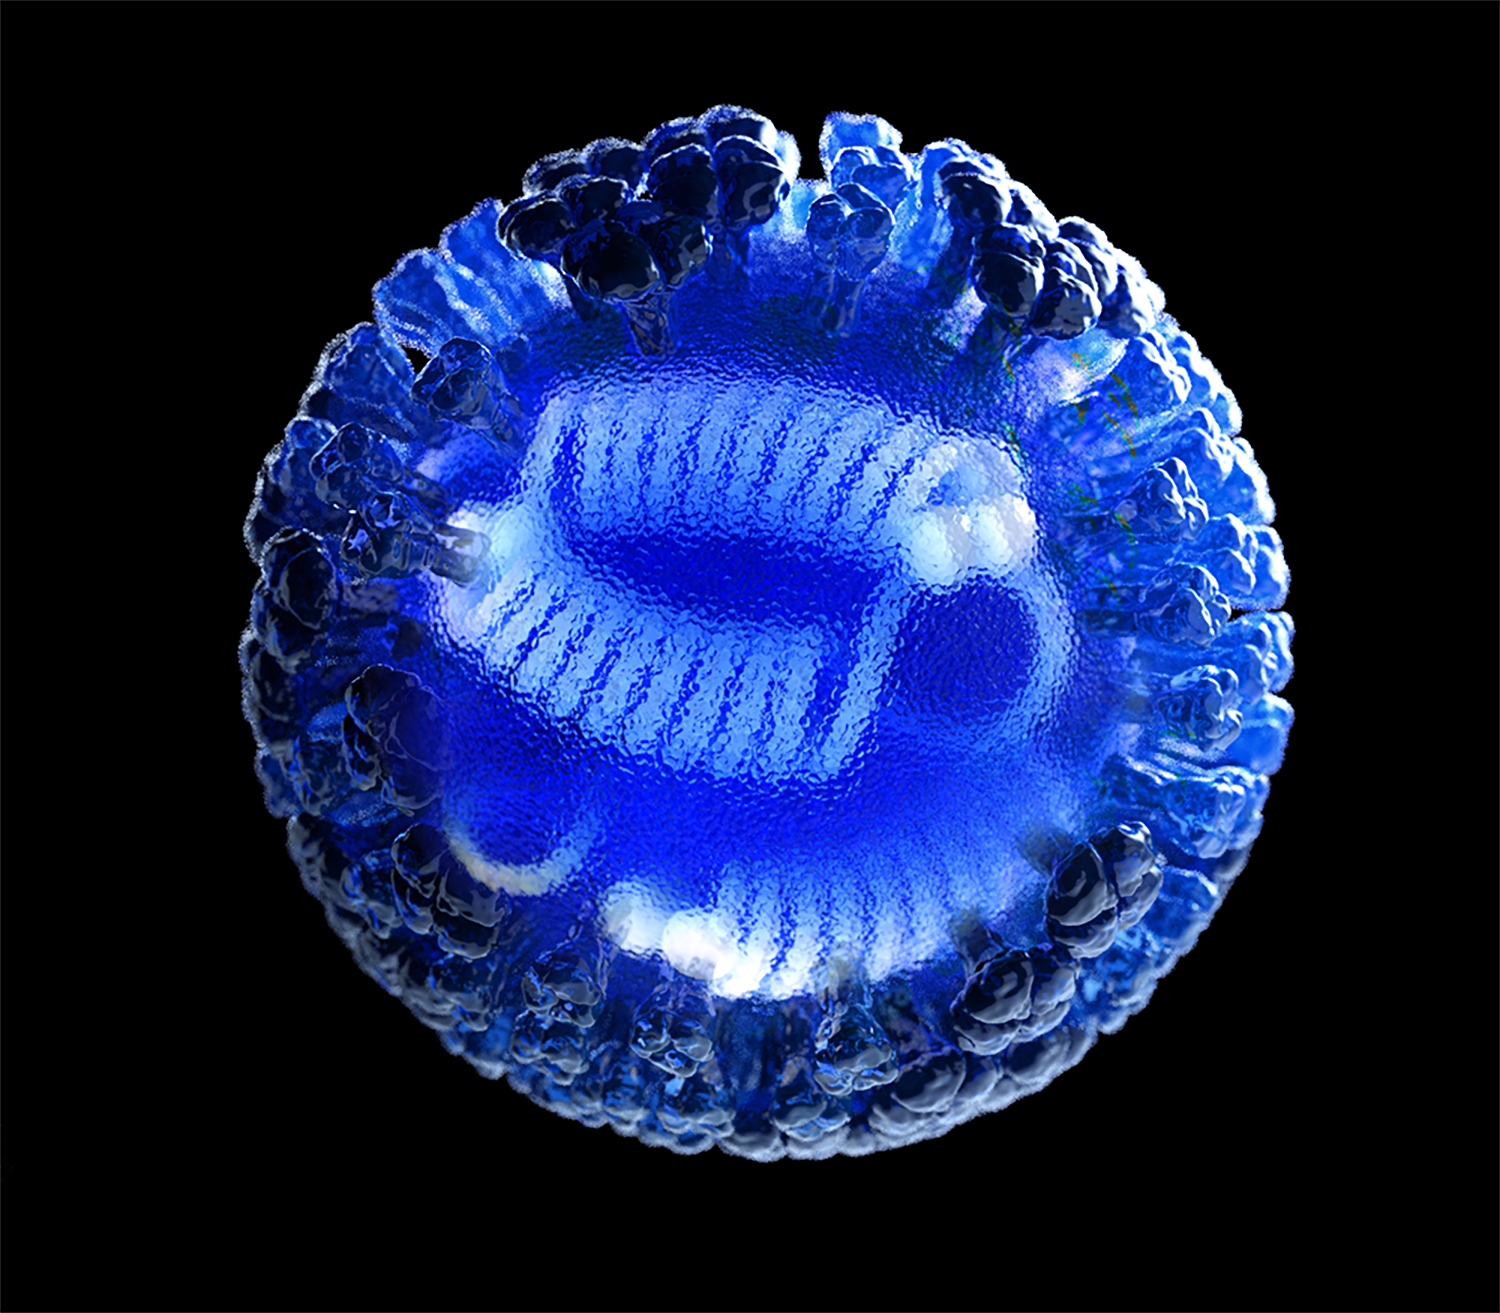 This illustration depicts a 3D computer-generated rendering of a whole influenza (flu) virus, rendered in semi-transparent blue, atop a black background. The transparent area in the center of the image, revealed the viral ribonucleoproteins (RNPs) inside.